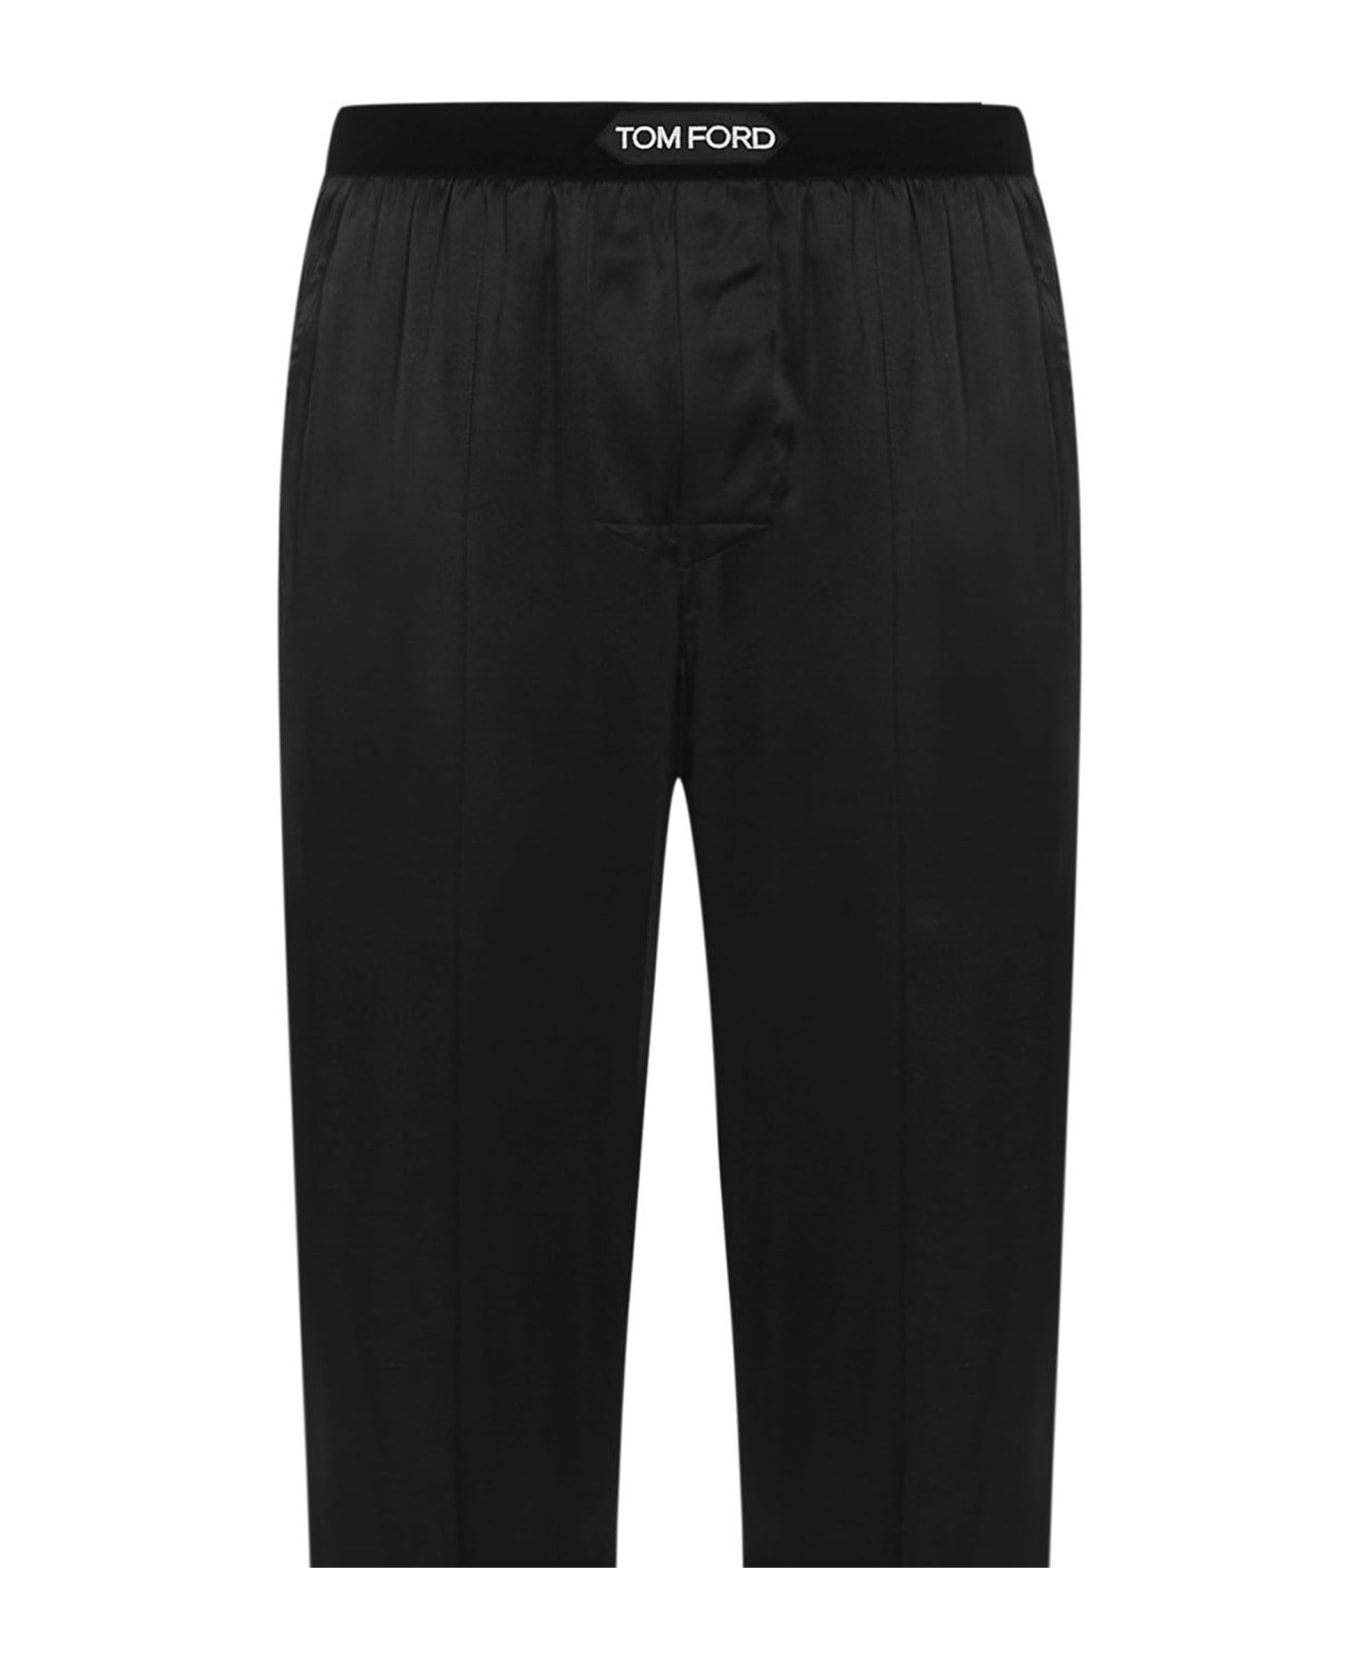 Tom Ford Trousers - NERO